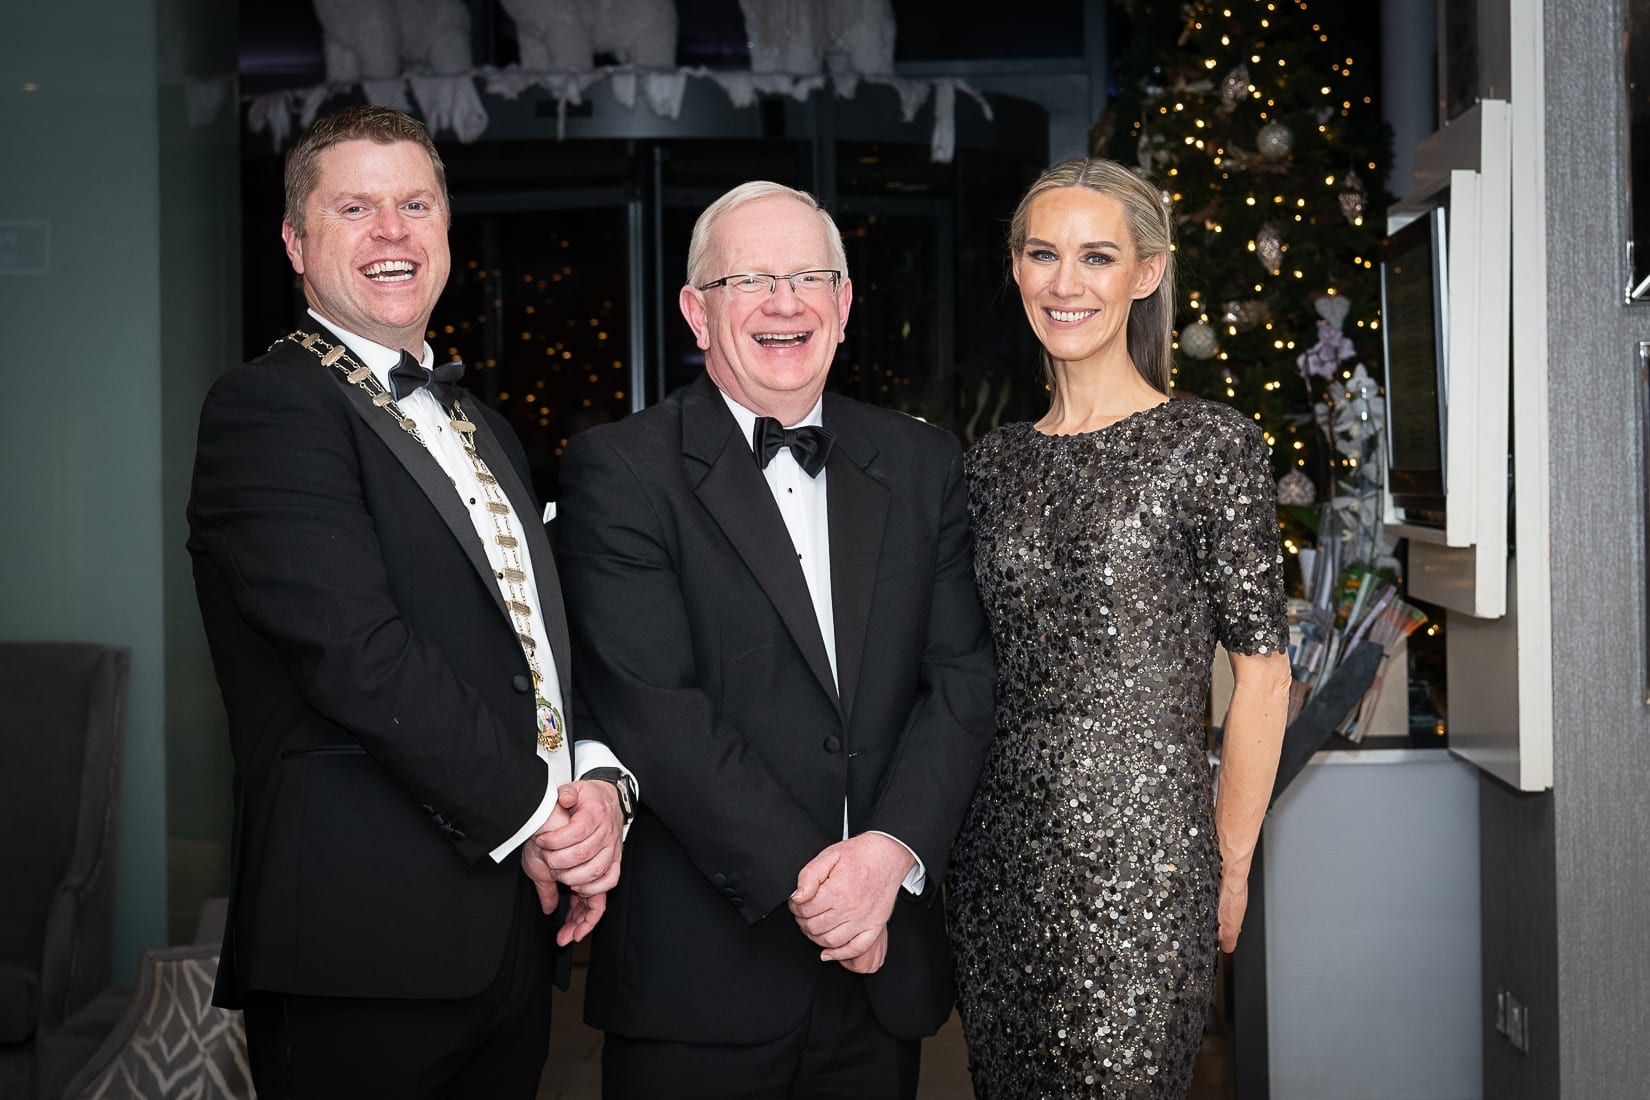 No repro fee-Limerick Chamber President’s Dinner
and Limerick Chamber Regional Business Awards 2019 which was held in the Strand Hotel on Friday 15th November - From Left to Right: Eoin Ryan - President Limerick Chamber, - LIT, Professor Vincent Cunnane- President LIT / Sponsor, Dee Ryan - CEO Limerick Chamber, 
Photo credit Shauna Kennedy